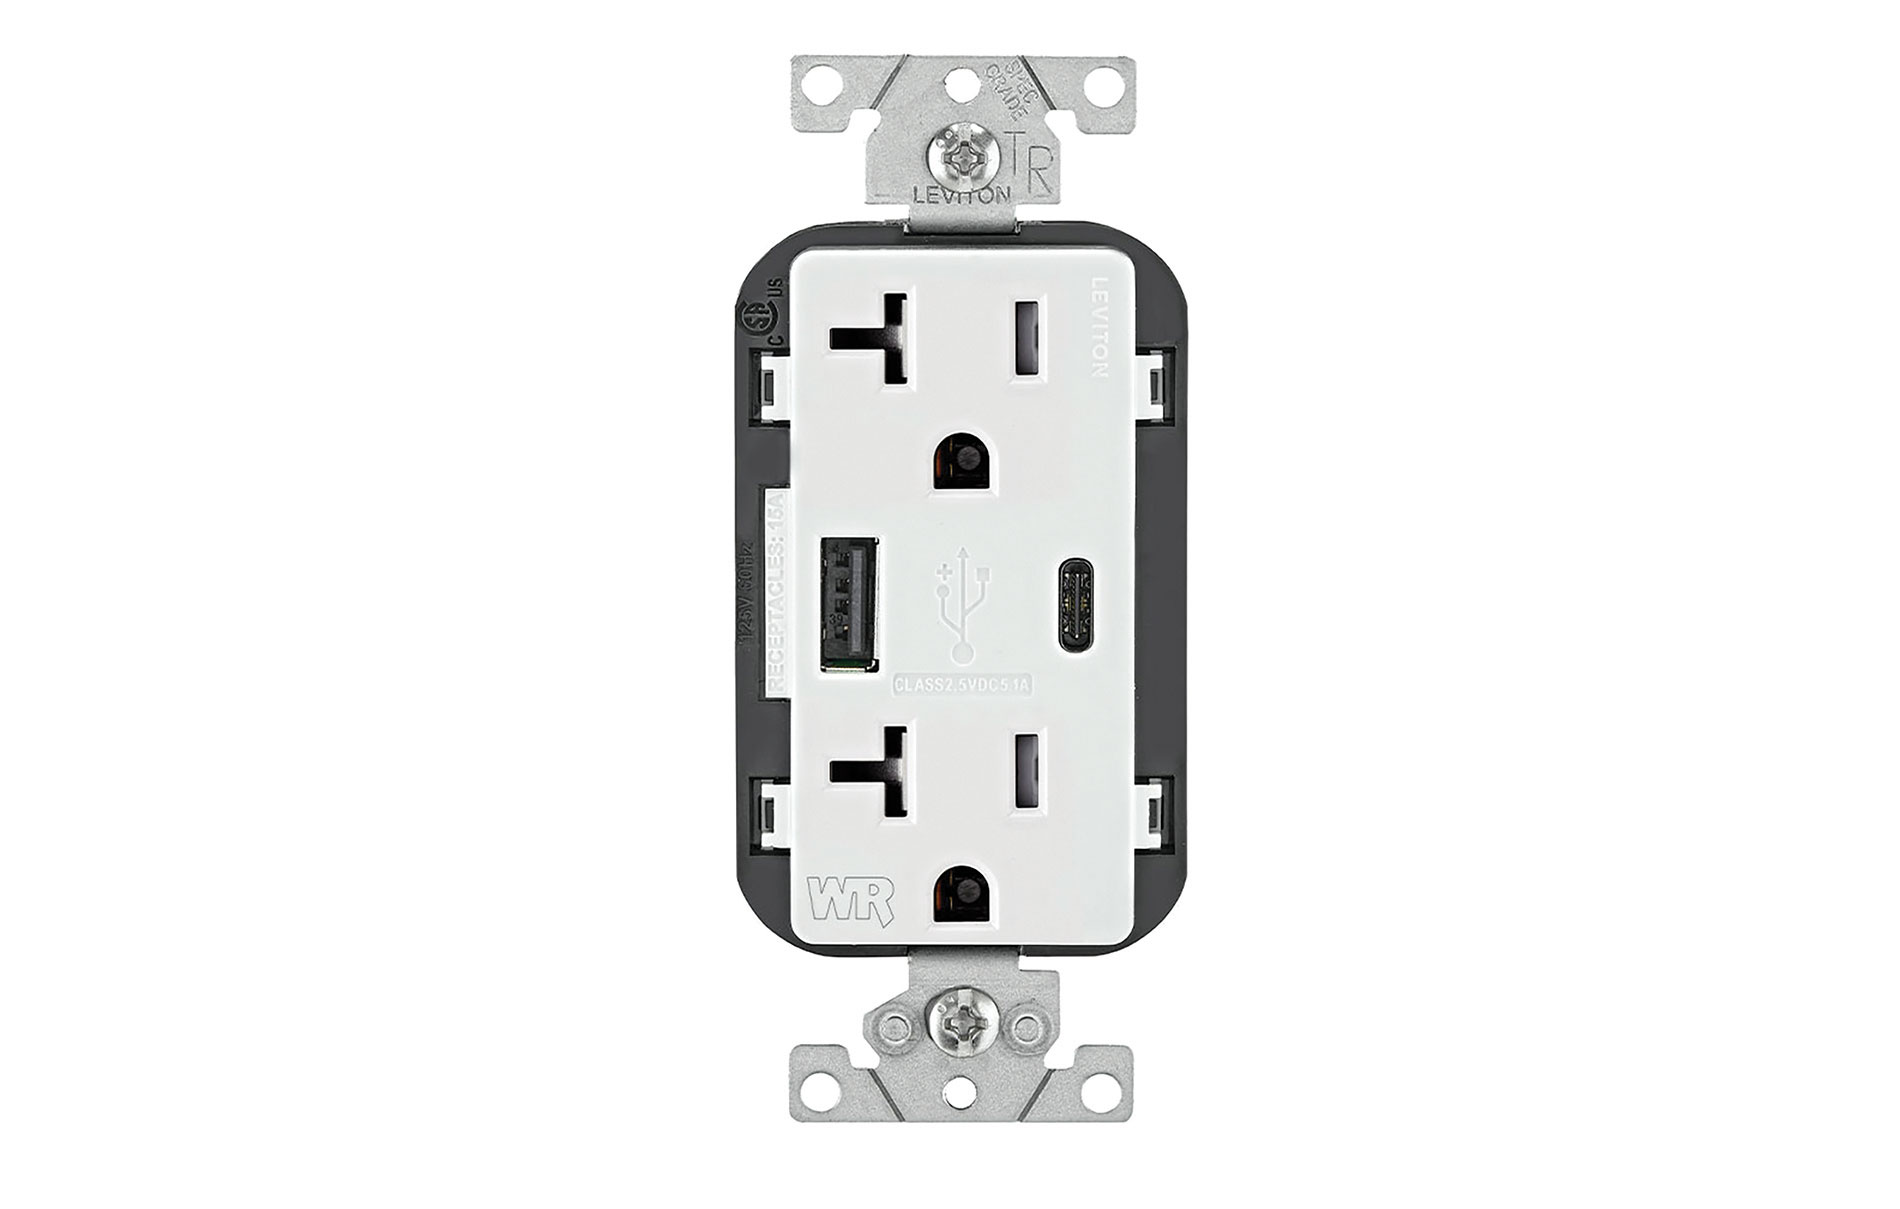 Gray and white receptacle with additional USB ports. Image by Leviton.